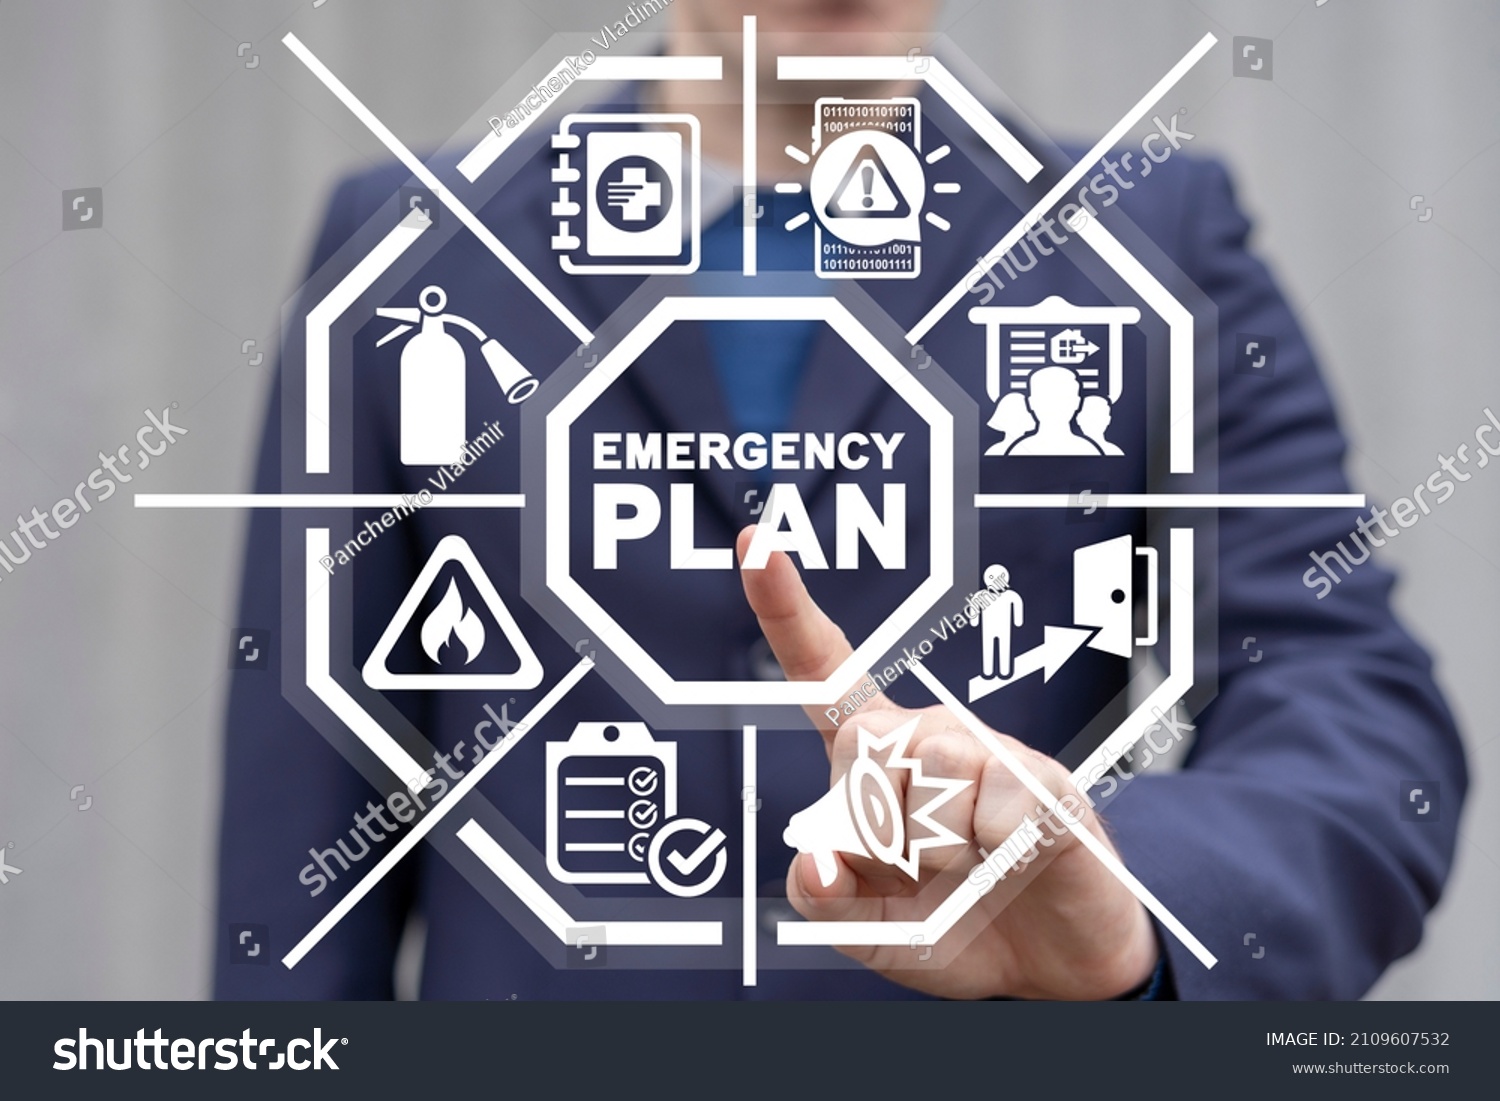 Concept of Emergency Preparedness Plan. Business Evacuation Training Concept. Emergency preparedness instructions for safety. #2109607532